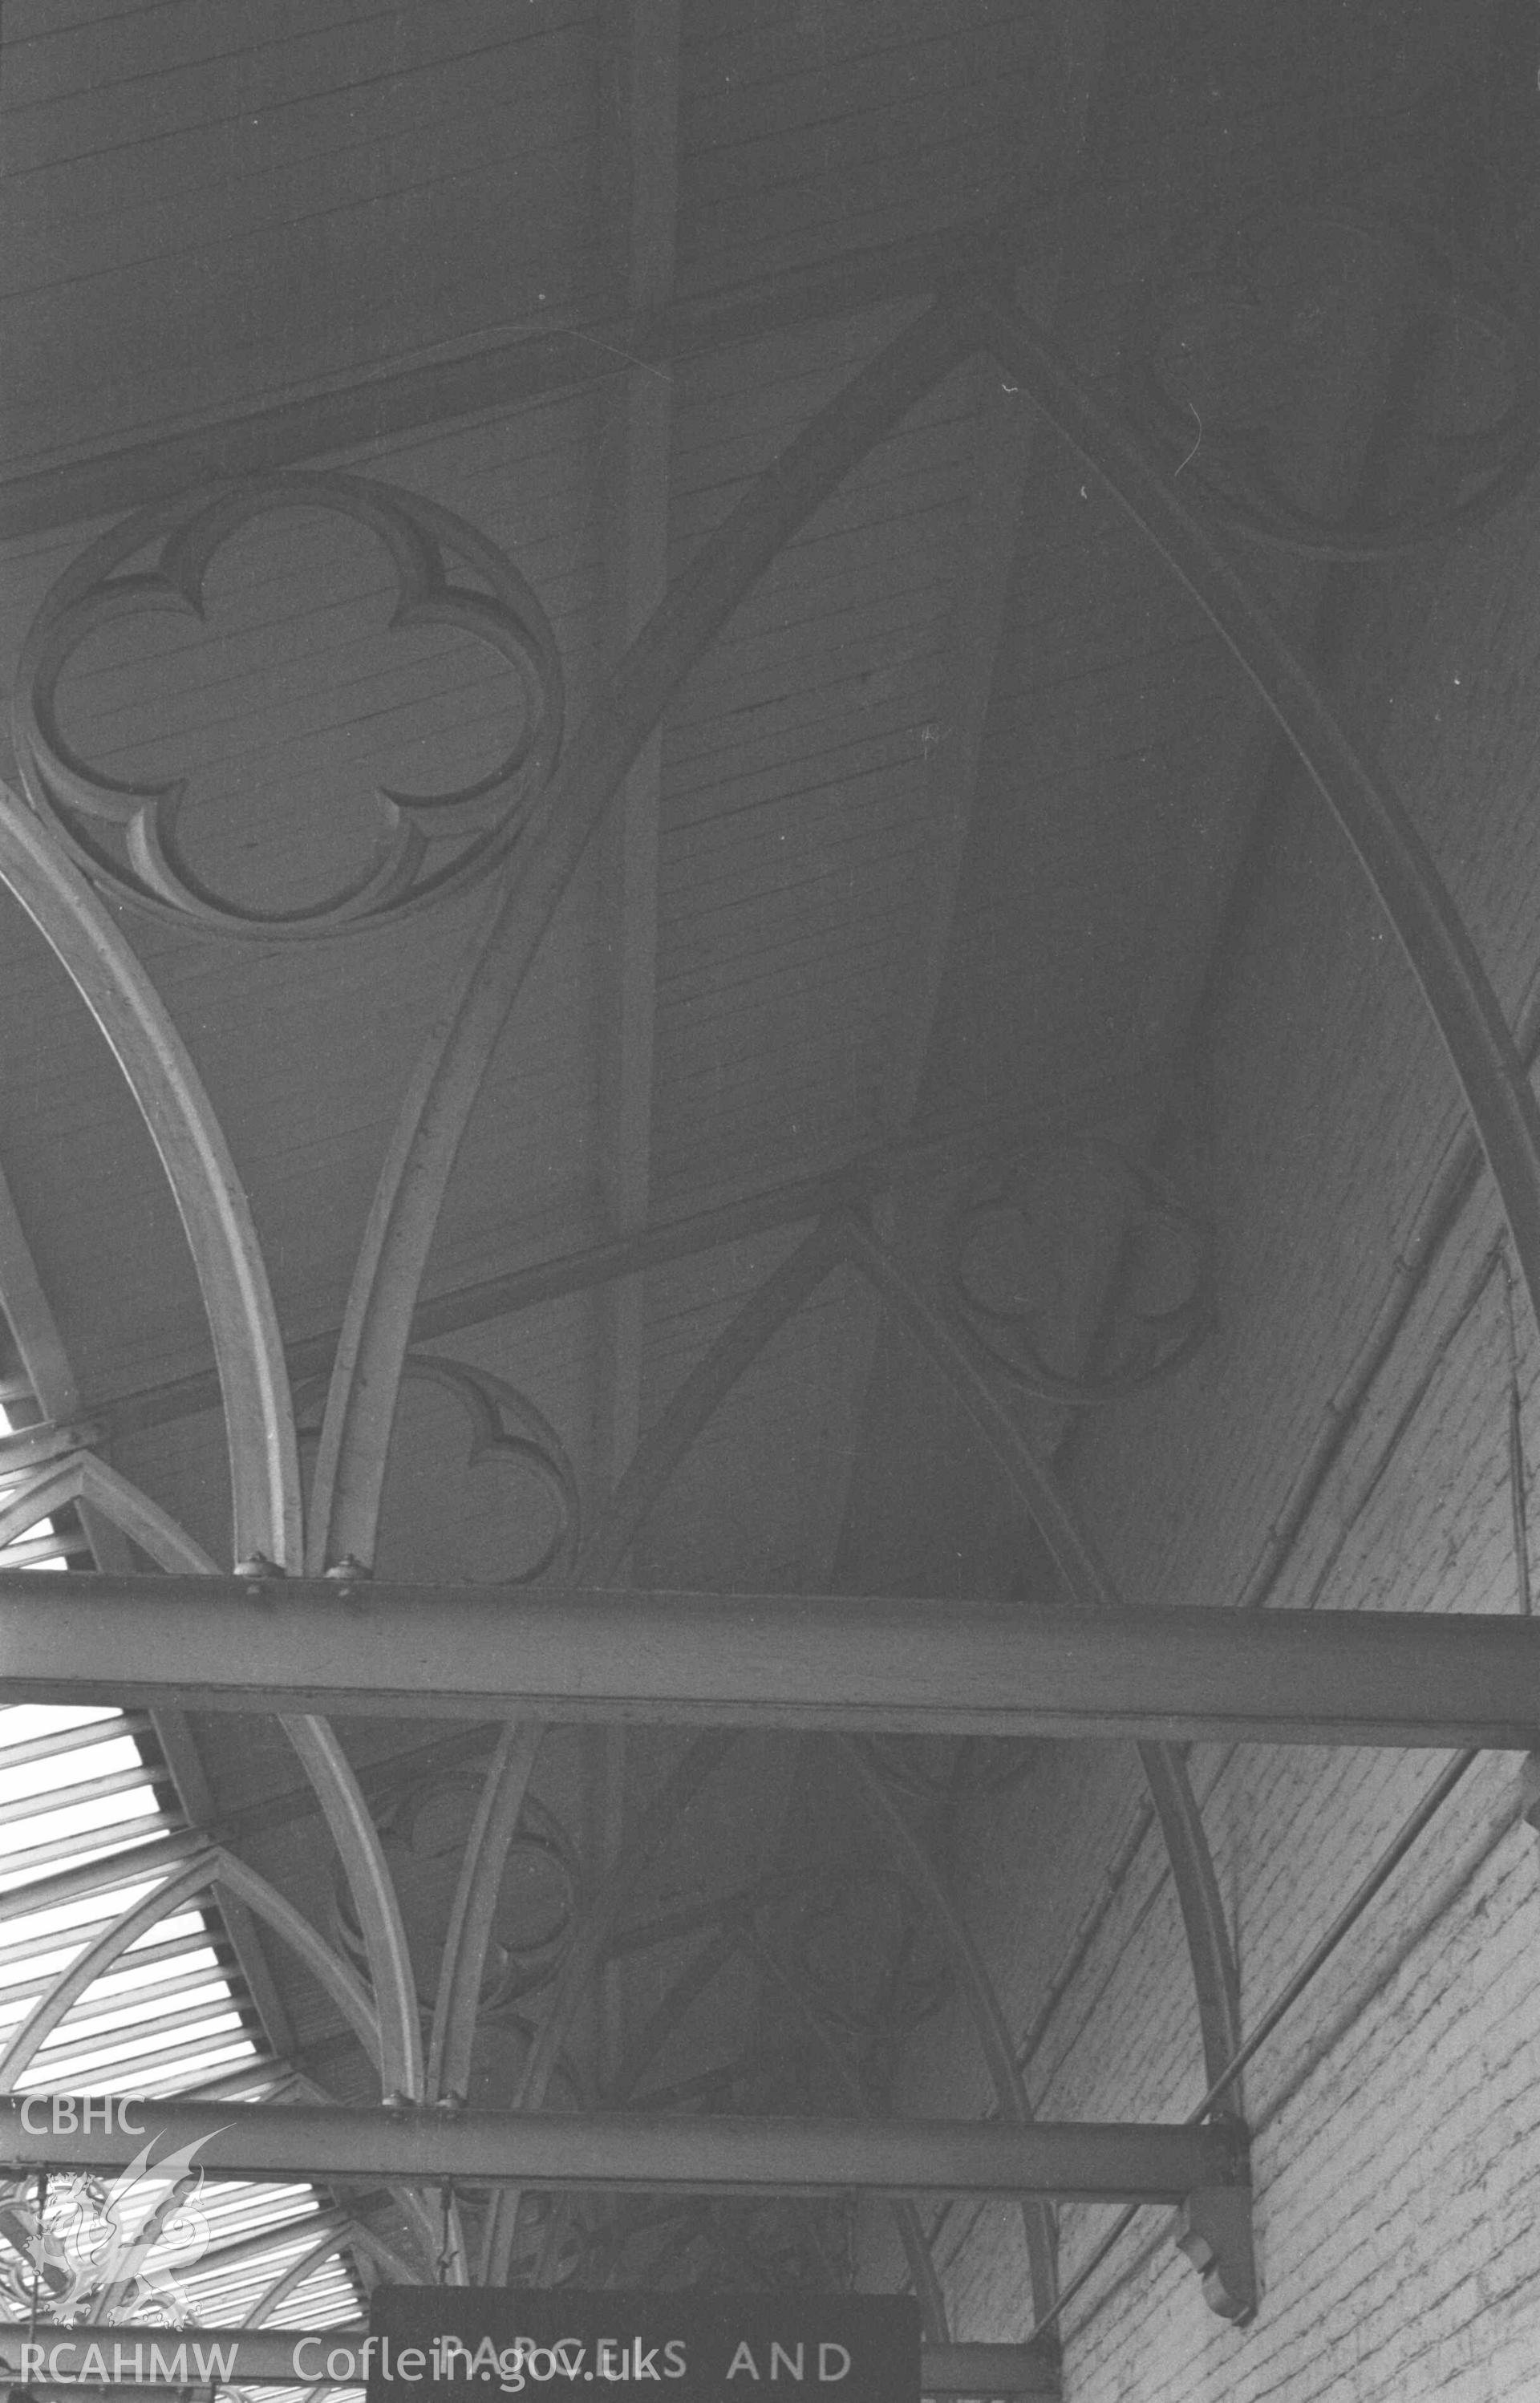 Digital copy of a black and white negative showing detailed view of iron roof gurders above Platform 1 at Abersytwyth Railway Station. Photographed by Arthur Chater on 3 January 1969. Looking south east from Grid Reference SN 5852 8157.